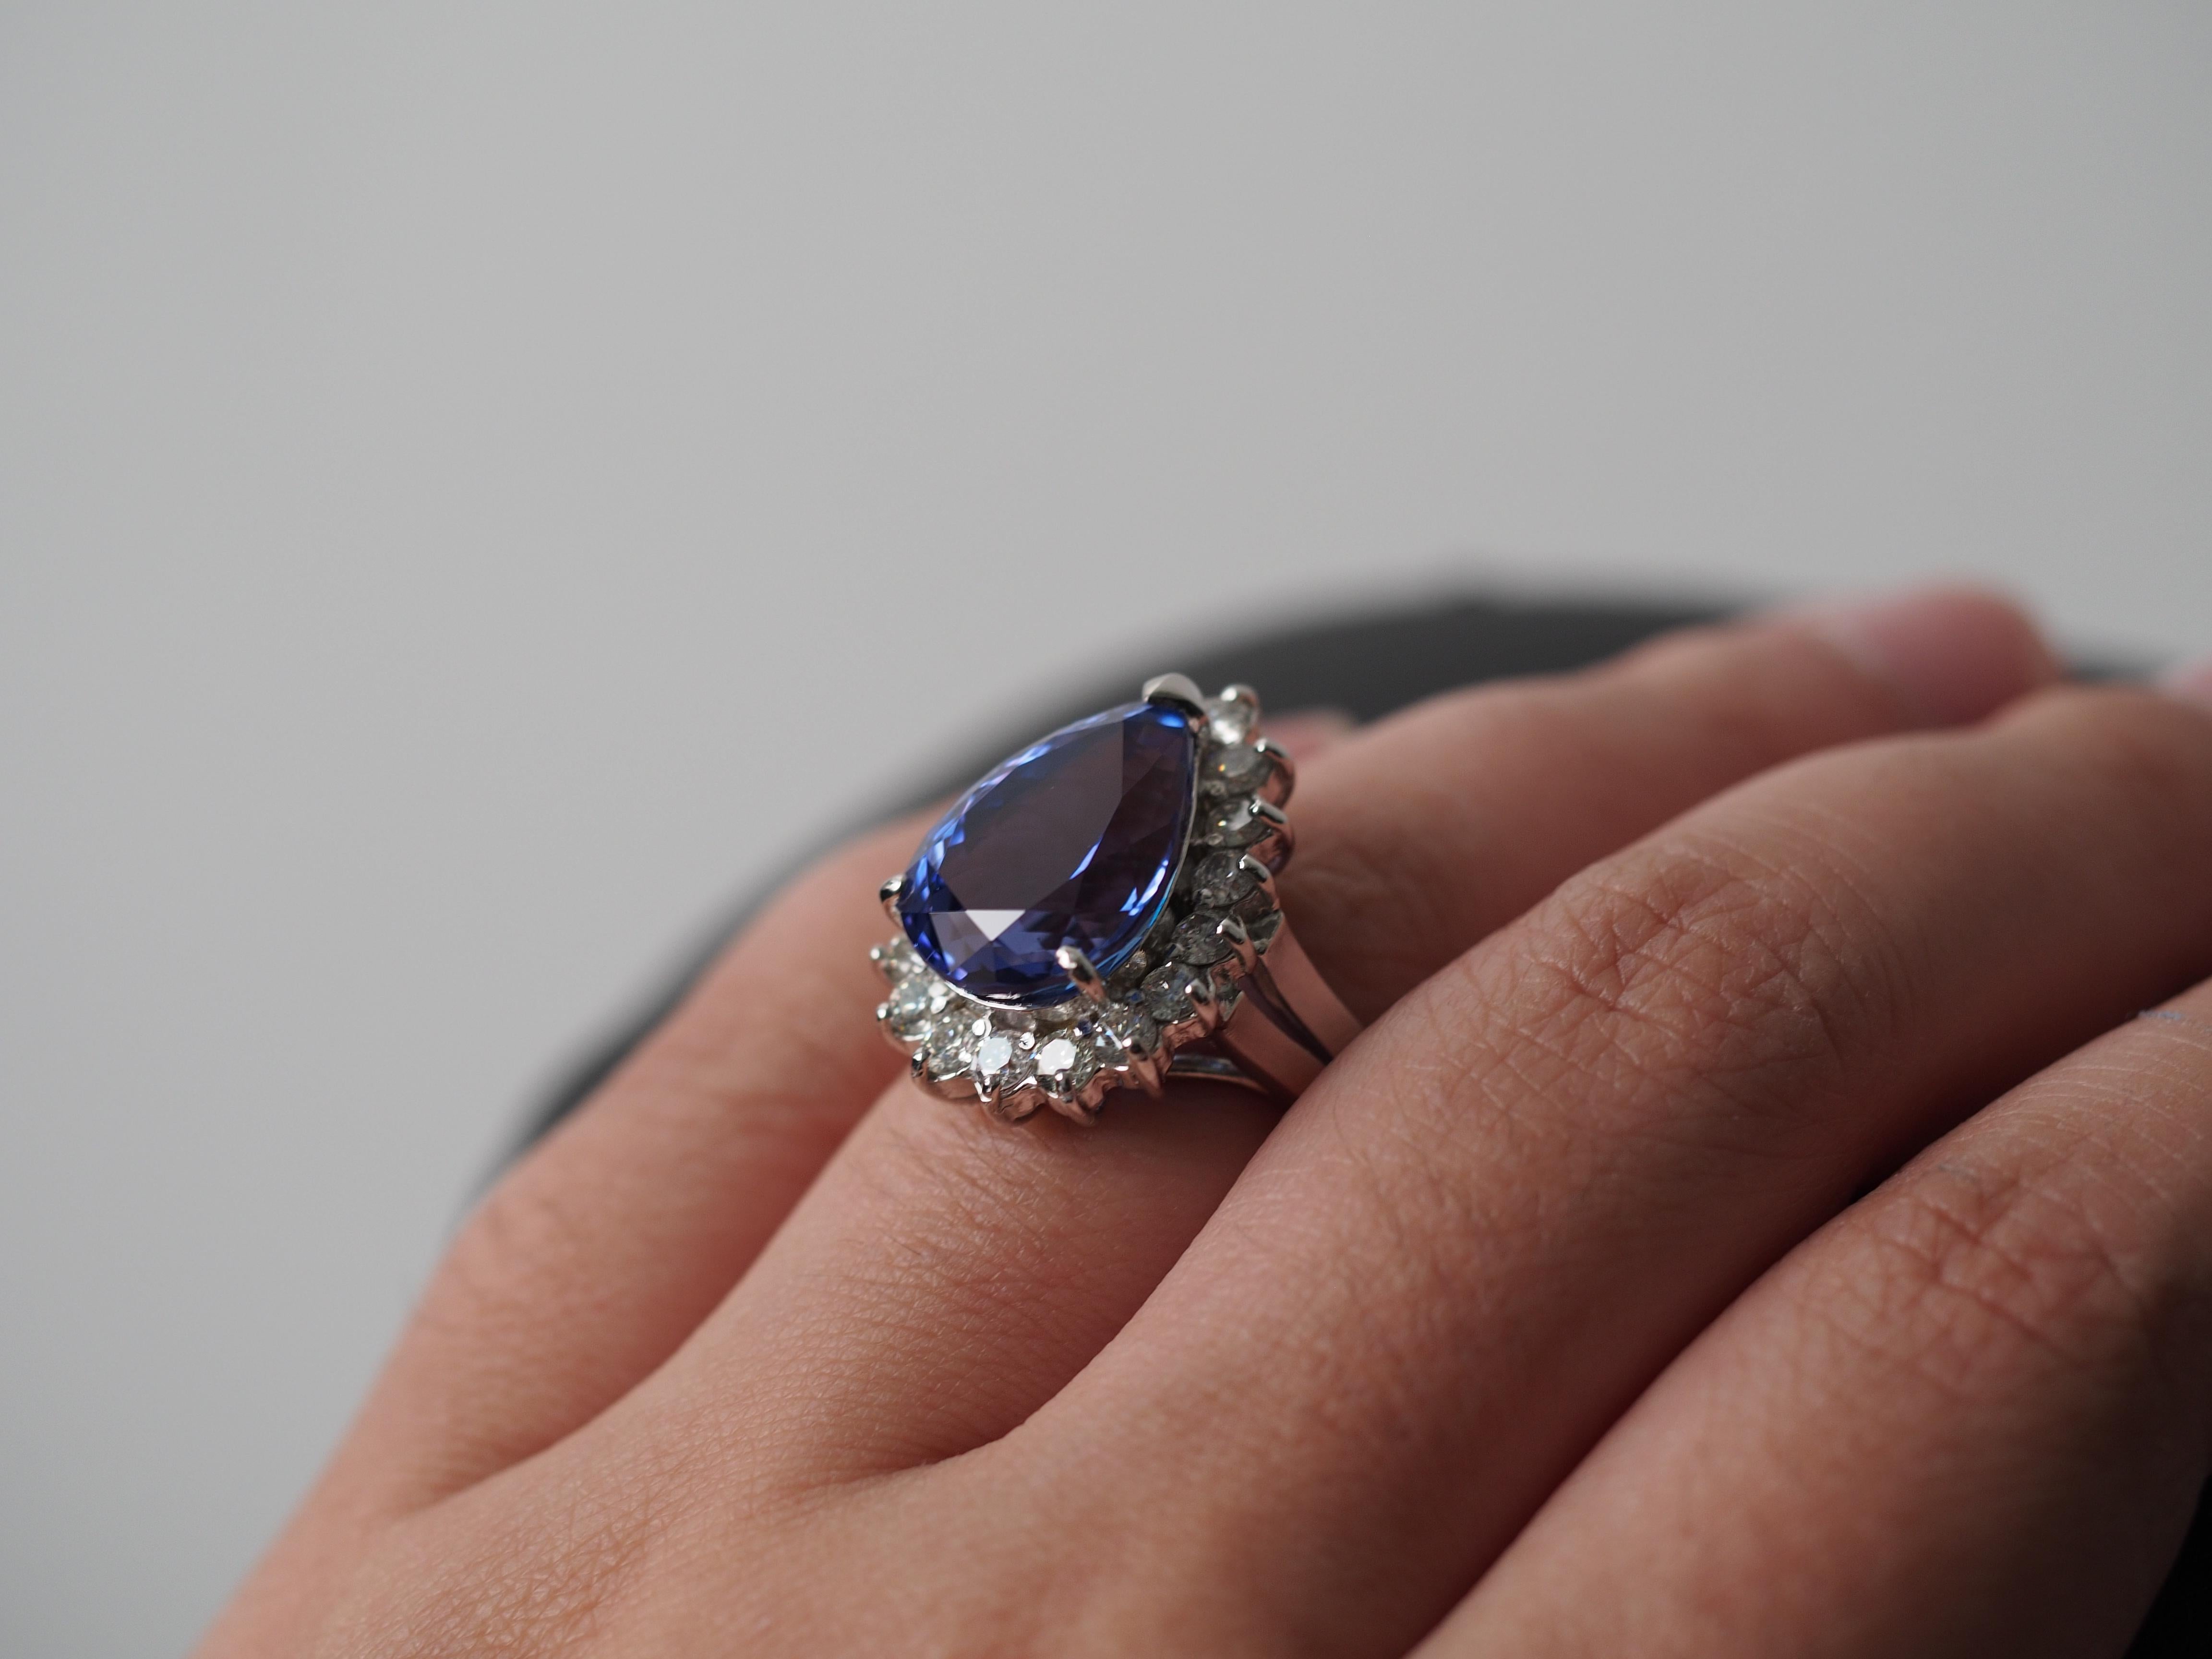 Year: 2000s

Item Details:
Ring Size: 8
Metal Type: 14K White Gold [Hallmarked, and Tested]
Weight: 11.25 grams

‌

Center Tanzanite Details:

GIA Report #:6223950713

Size: 10.00ct

Dimensions: 16.00mm x 12.15mm x 8.40mm

Shape: Pear